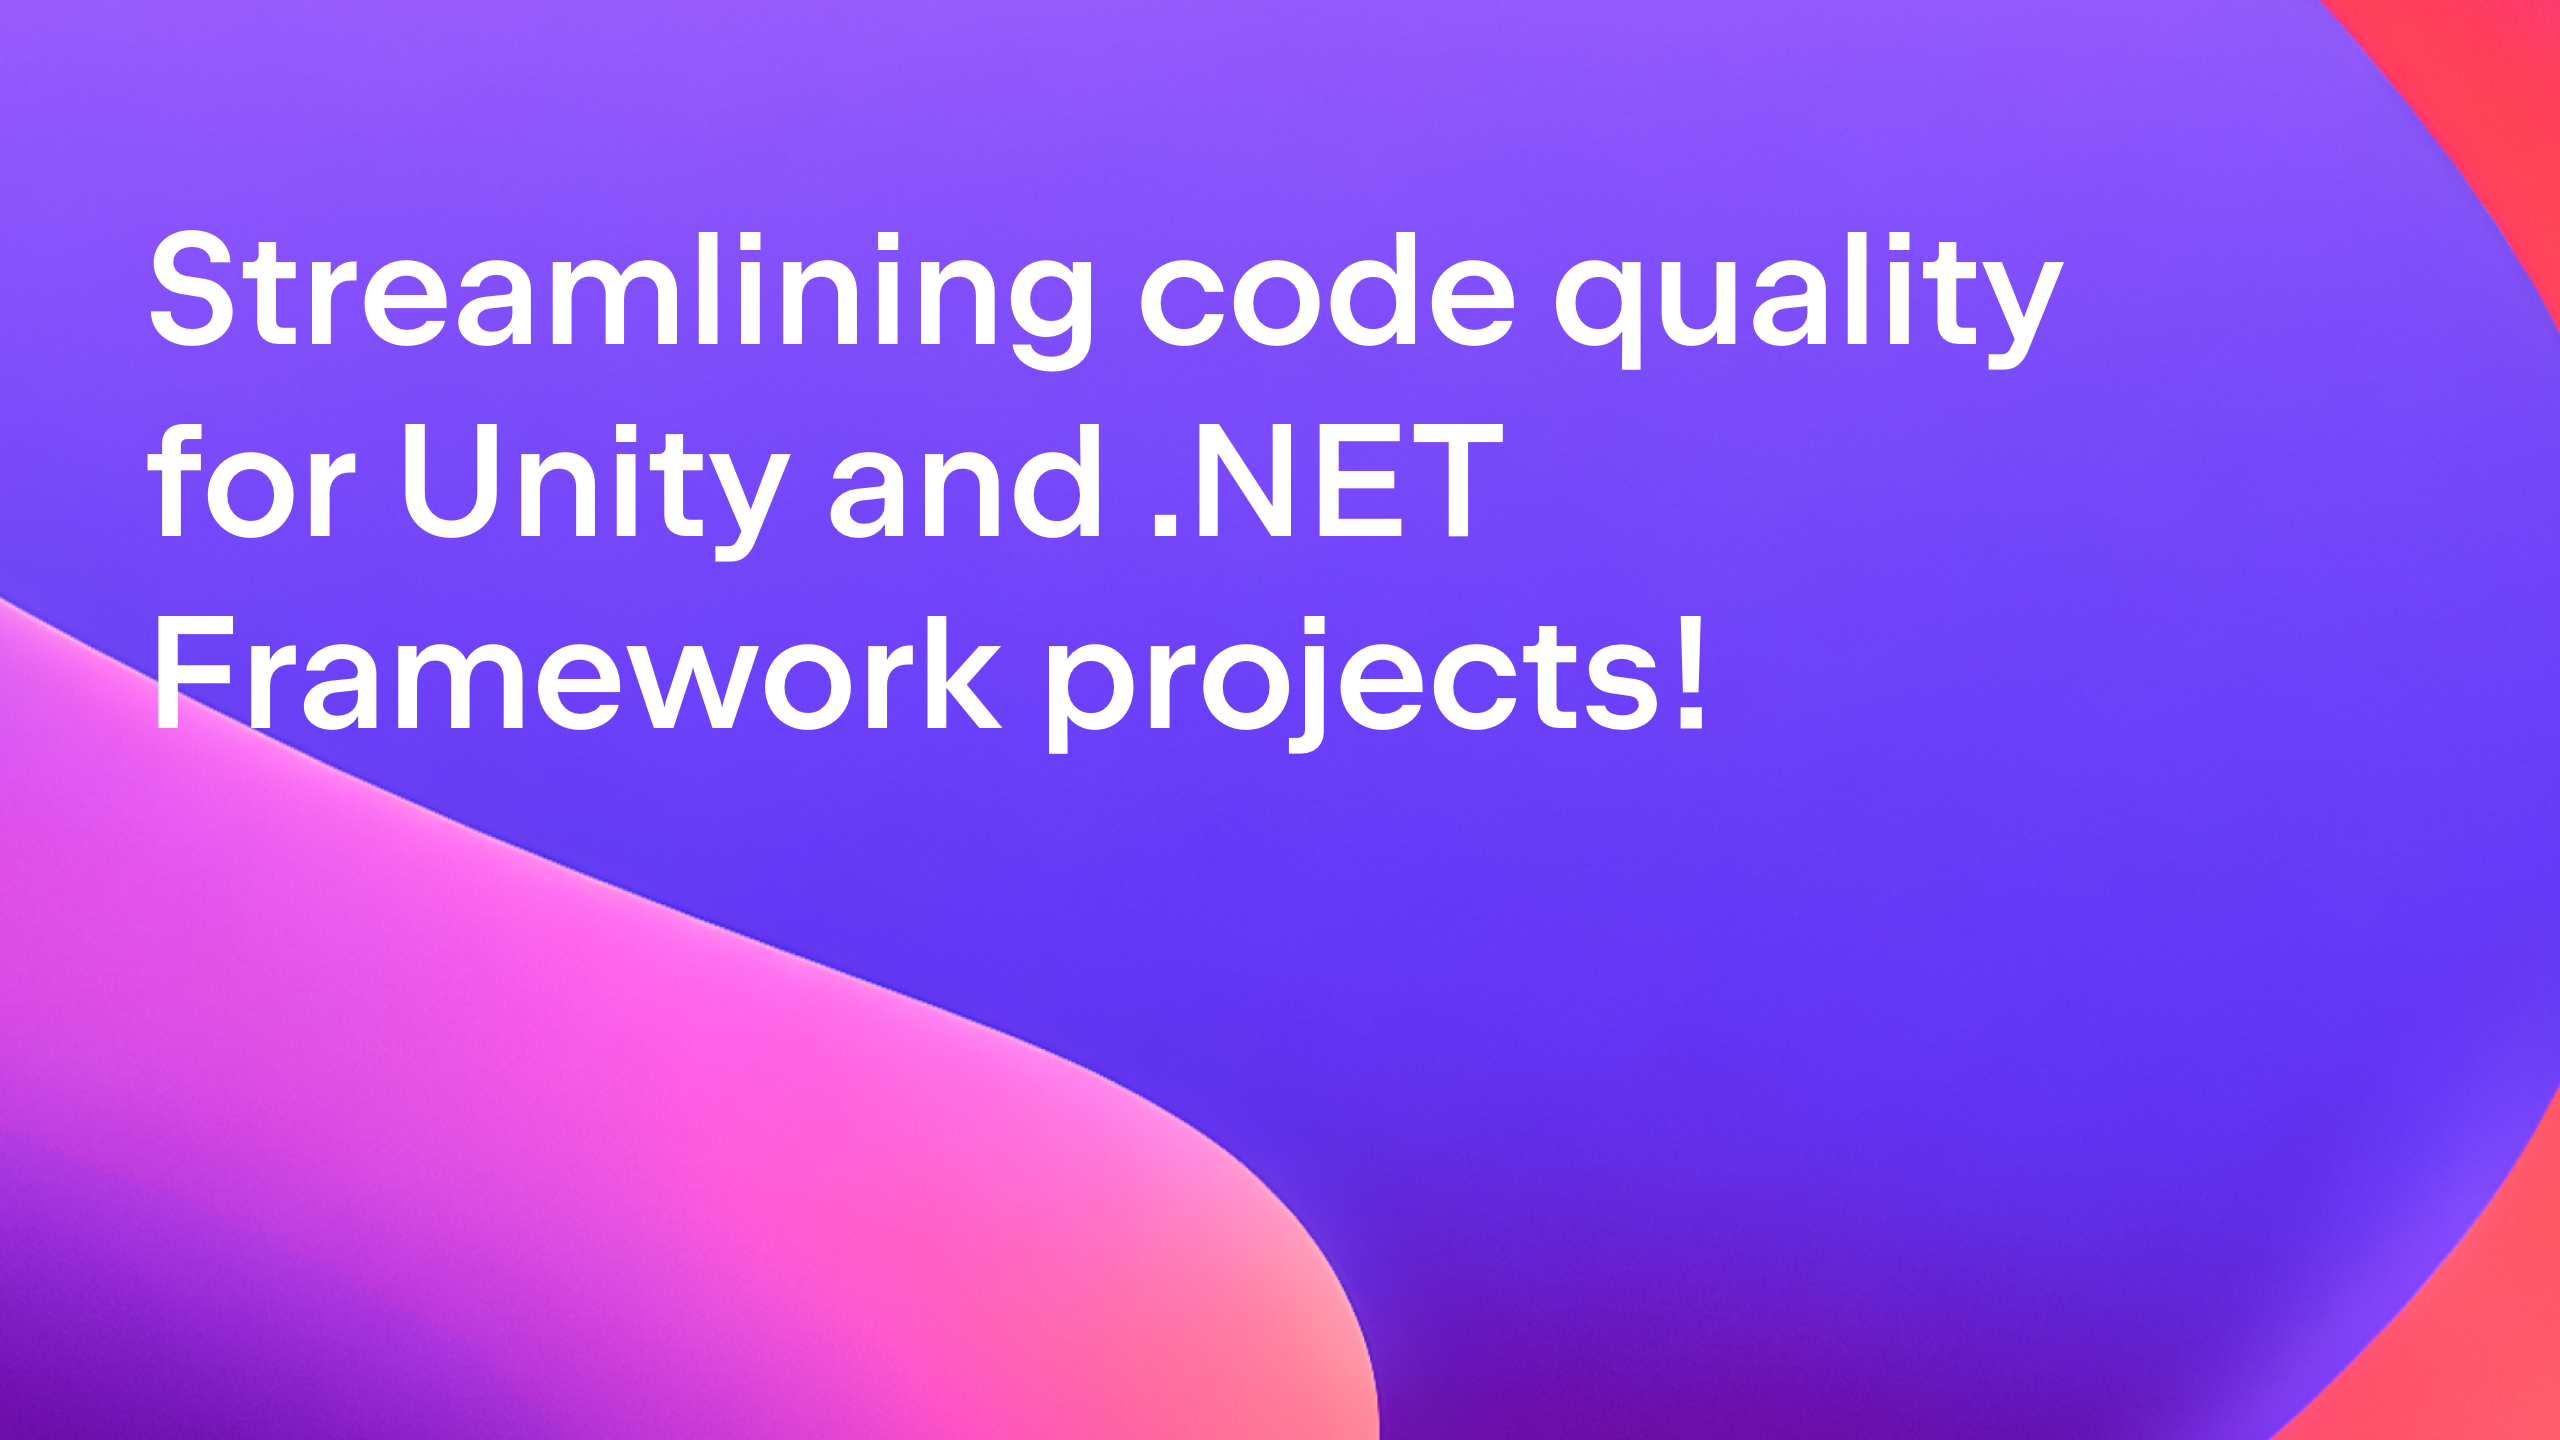 Native mode - streamlining code quality for Unity and .NET Framework projects